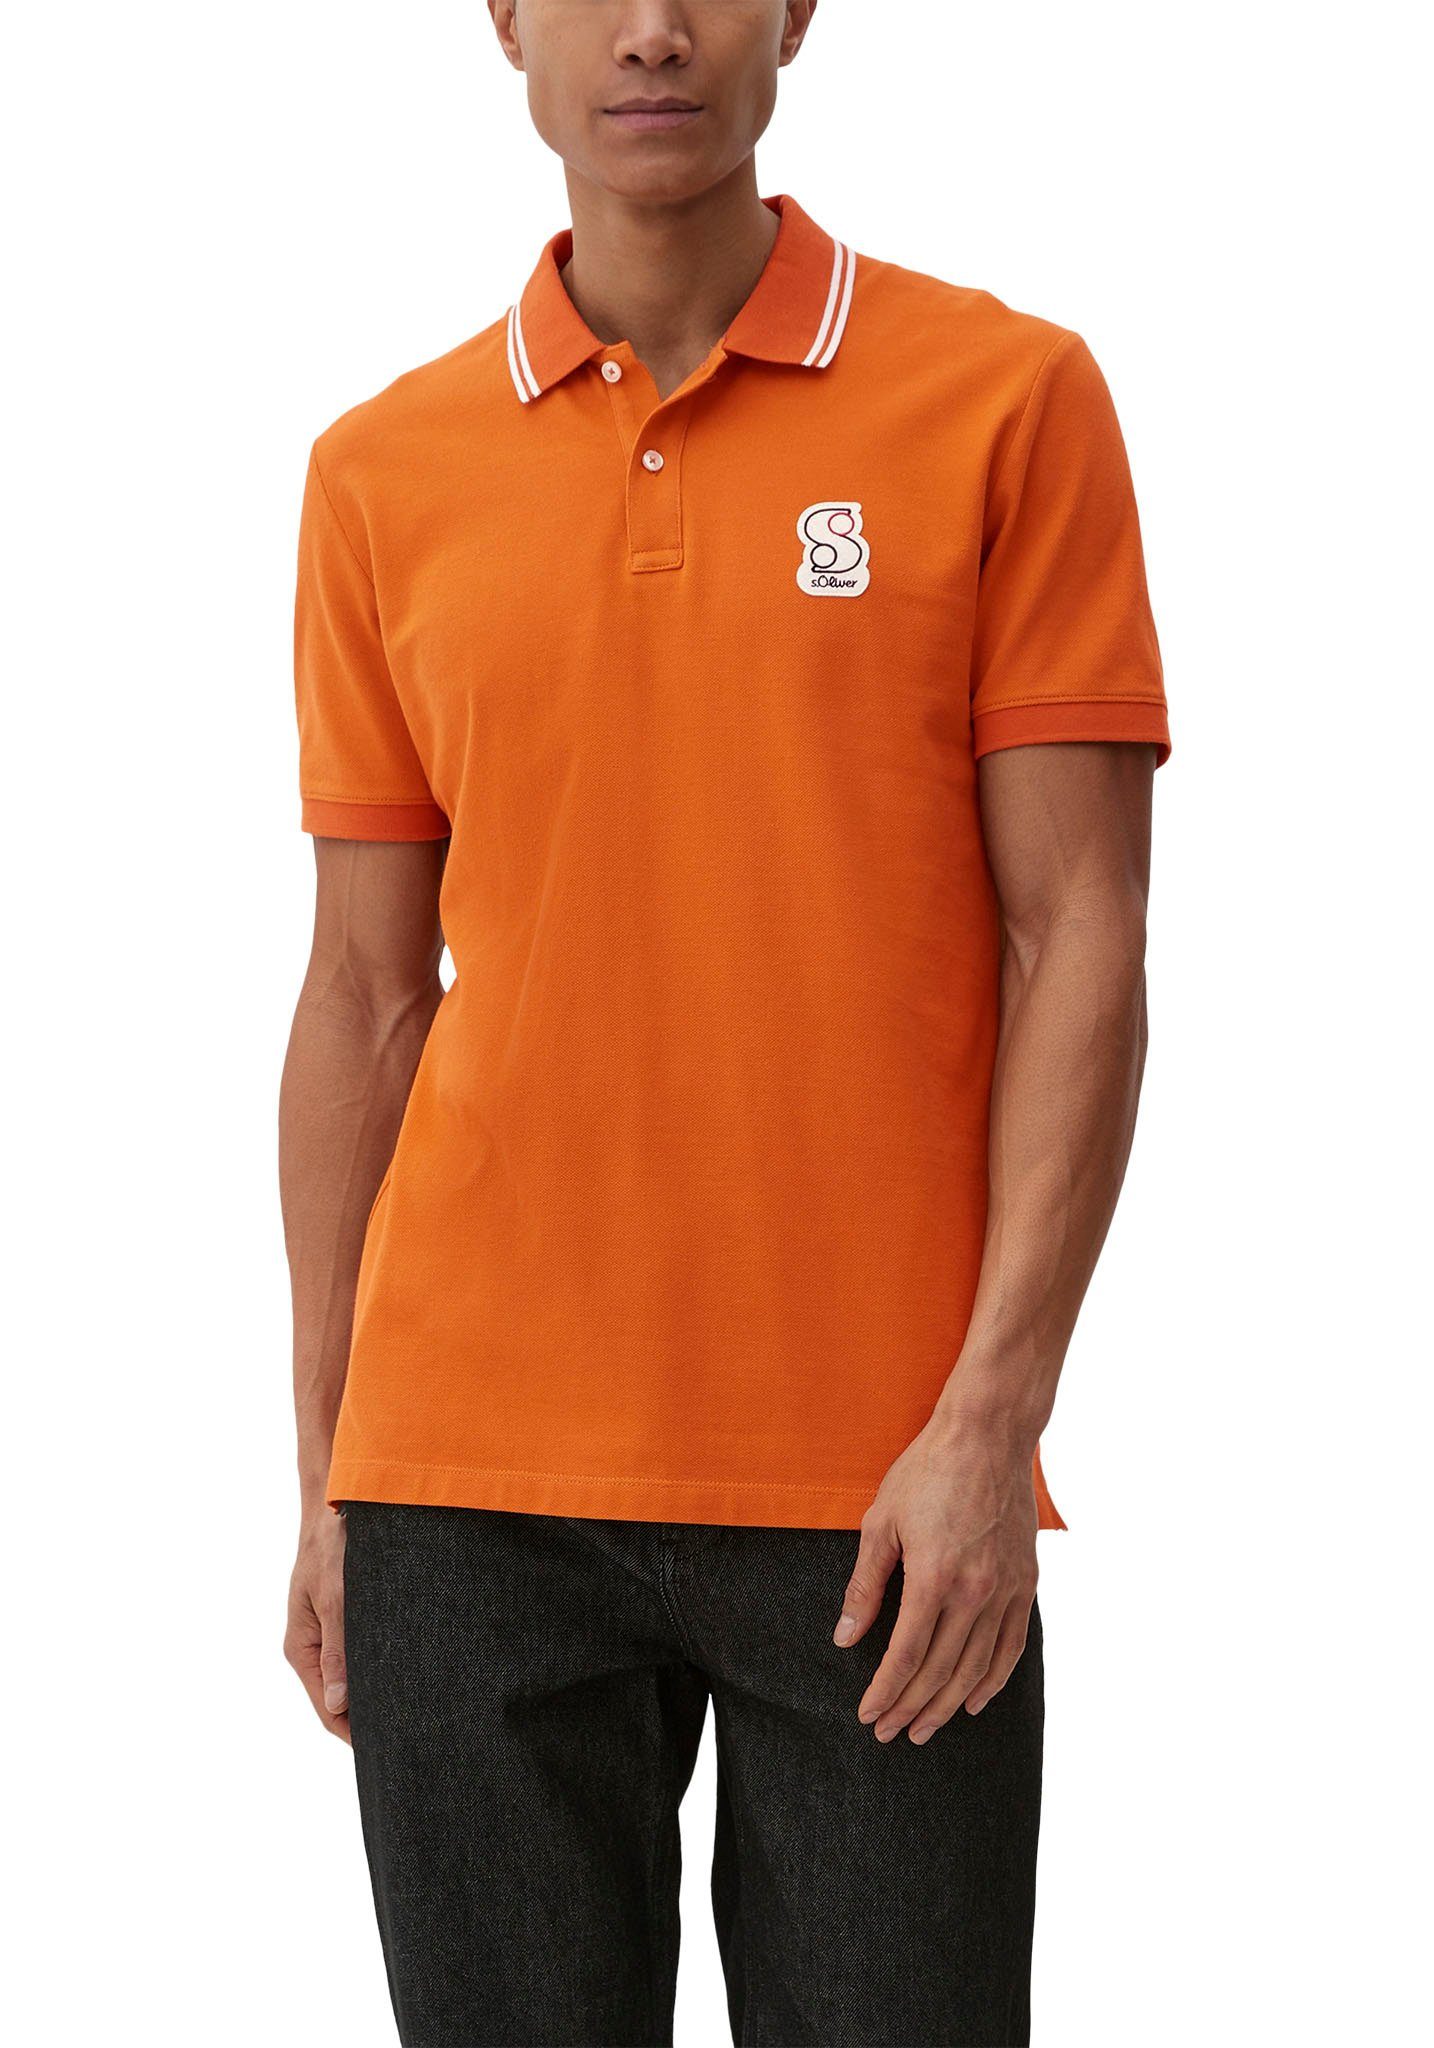 Labelpatch Poloshirt mit s.Oliver